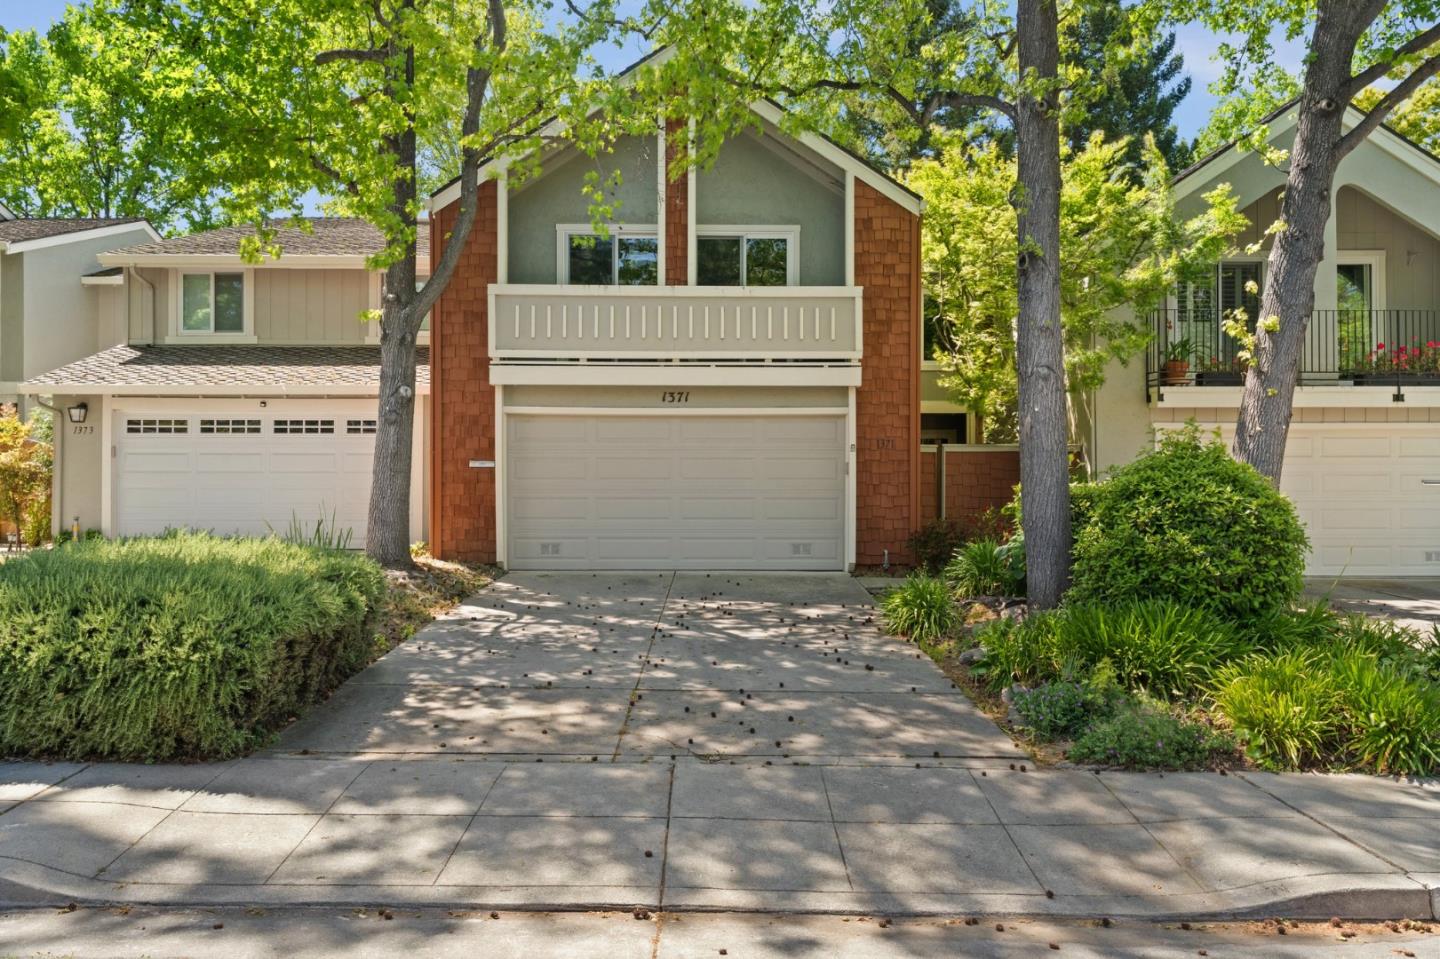 Photo of 1371 Sydney Dr in Sunnyvale, CA